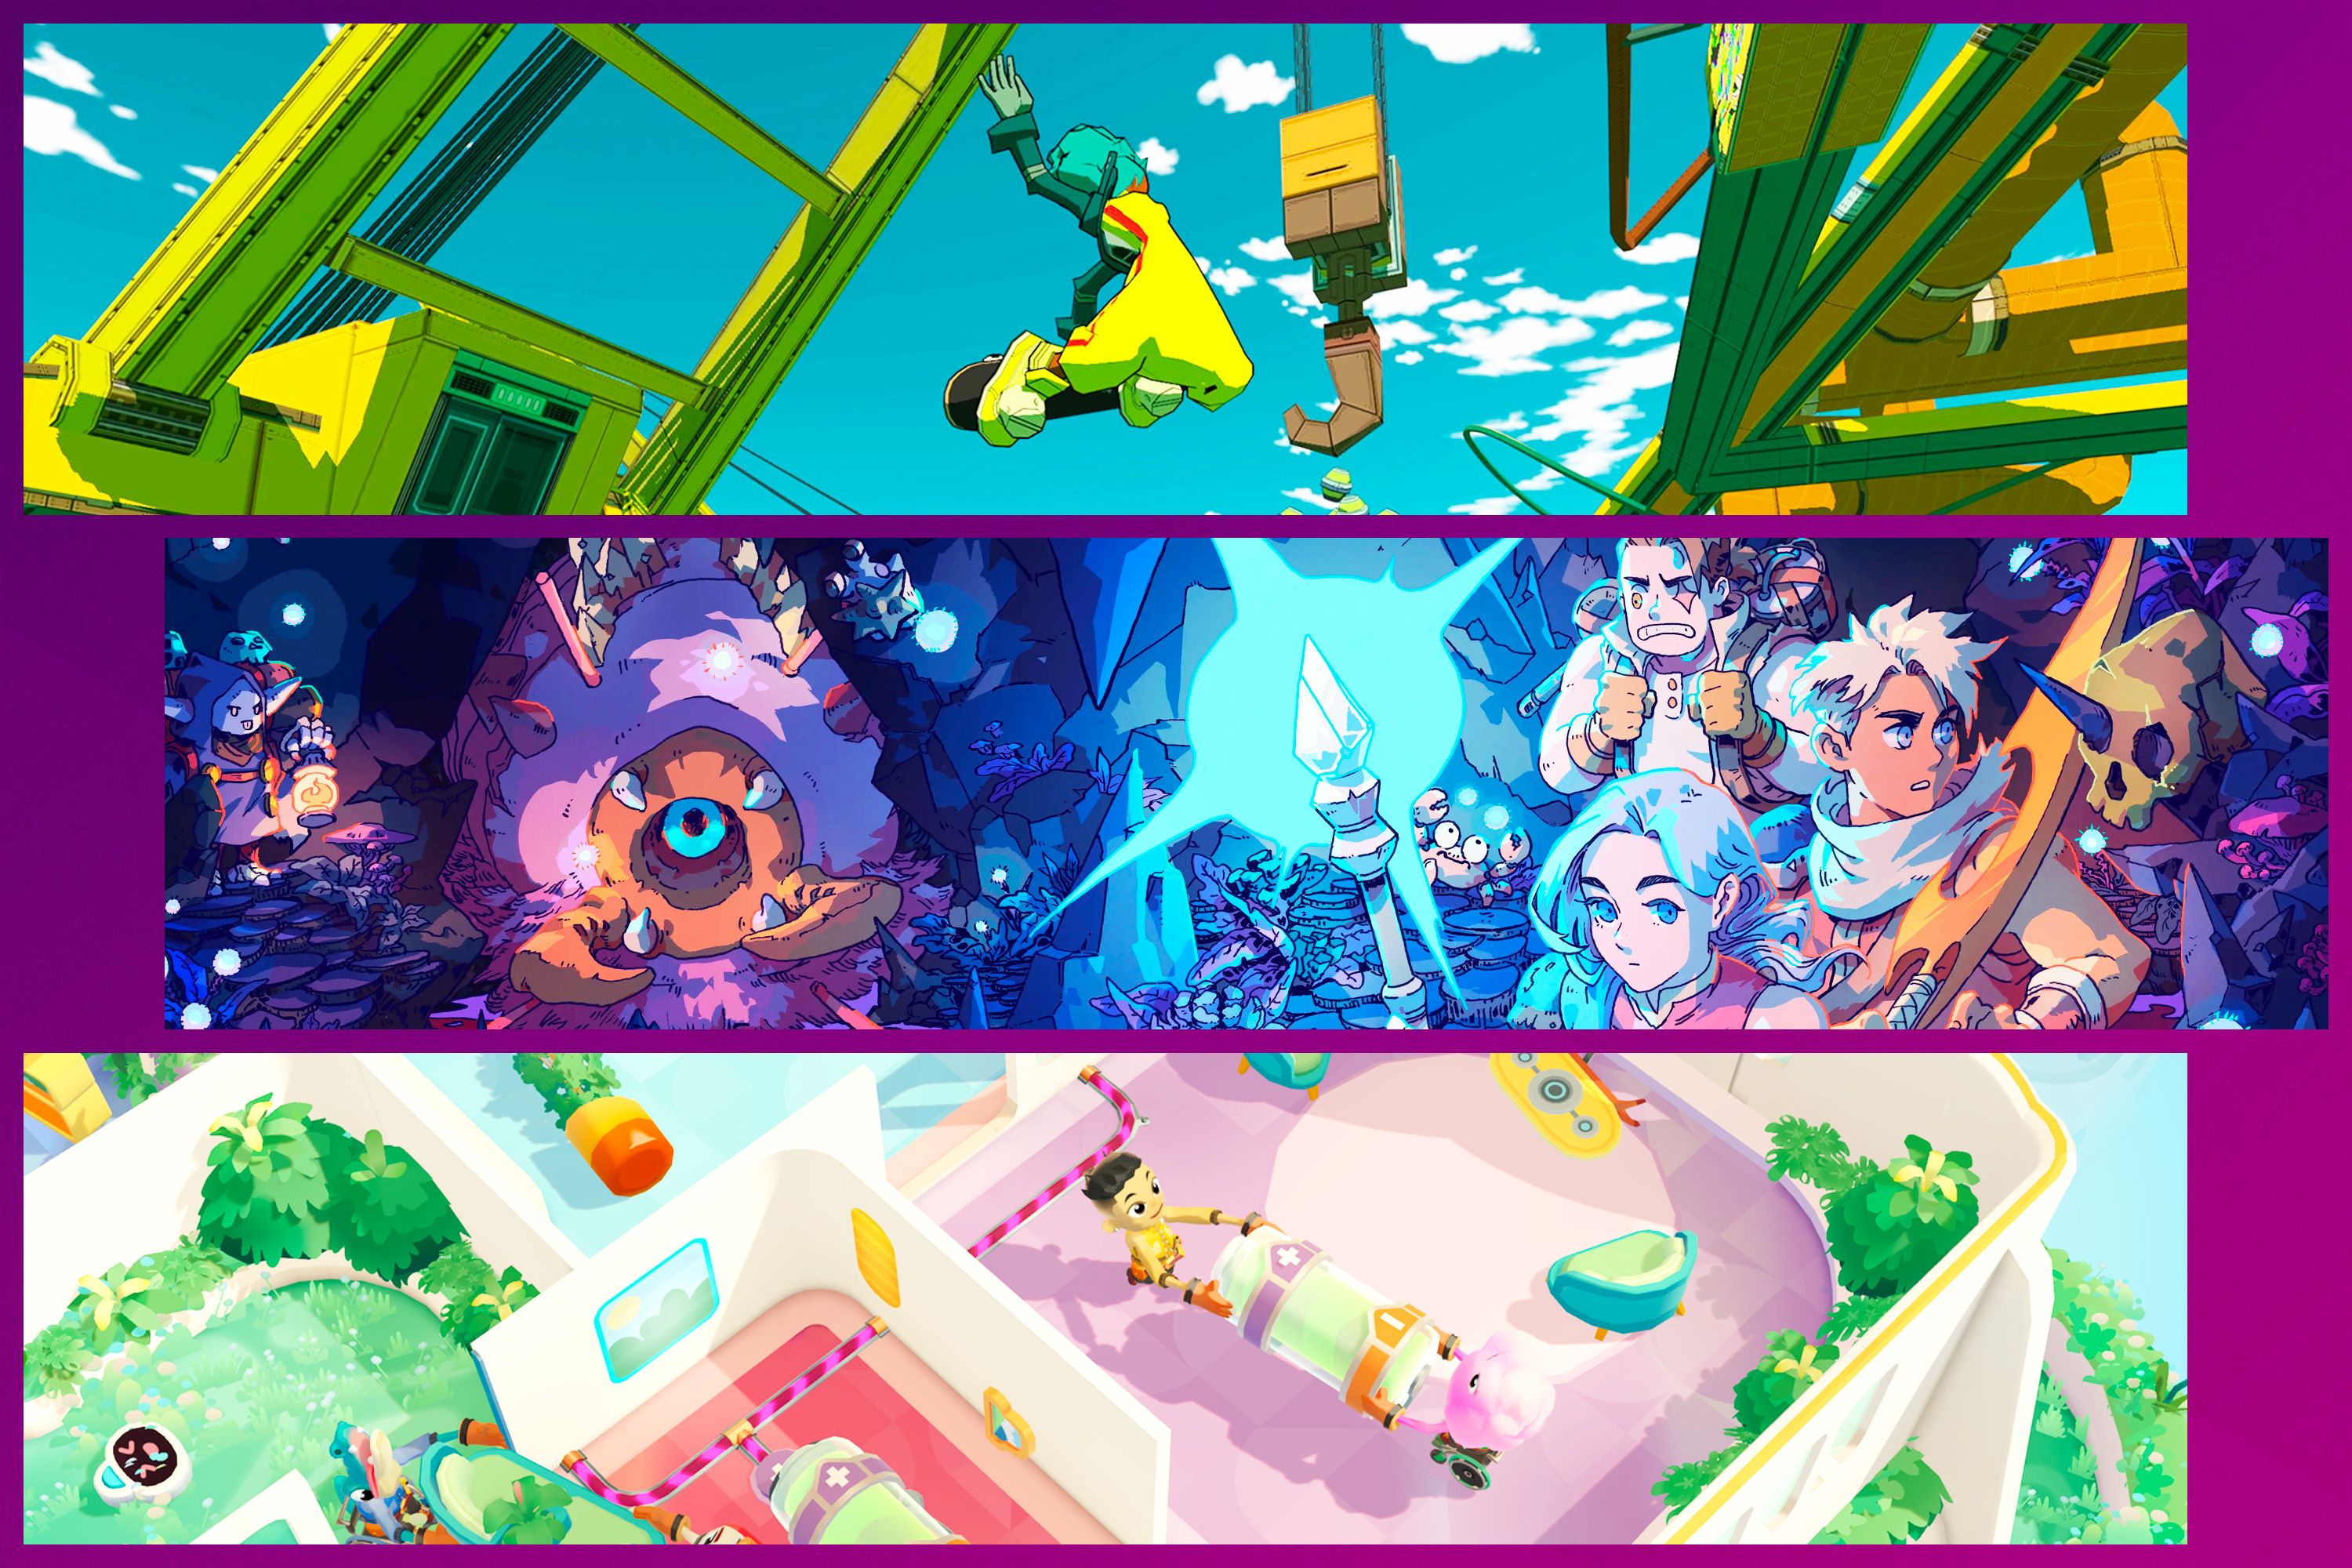 A graphic compiling images from three games stacked on top of each other. The games are Bomb Rush Cyberfunk, a skating action game, Sea of Stars, a turn-based RPG, and Moving Out 2, a co-op multiplayer game.